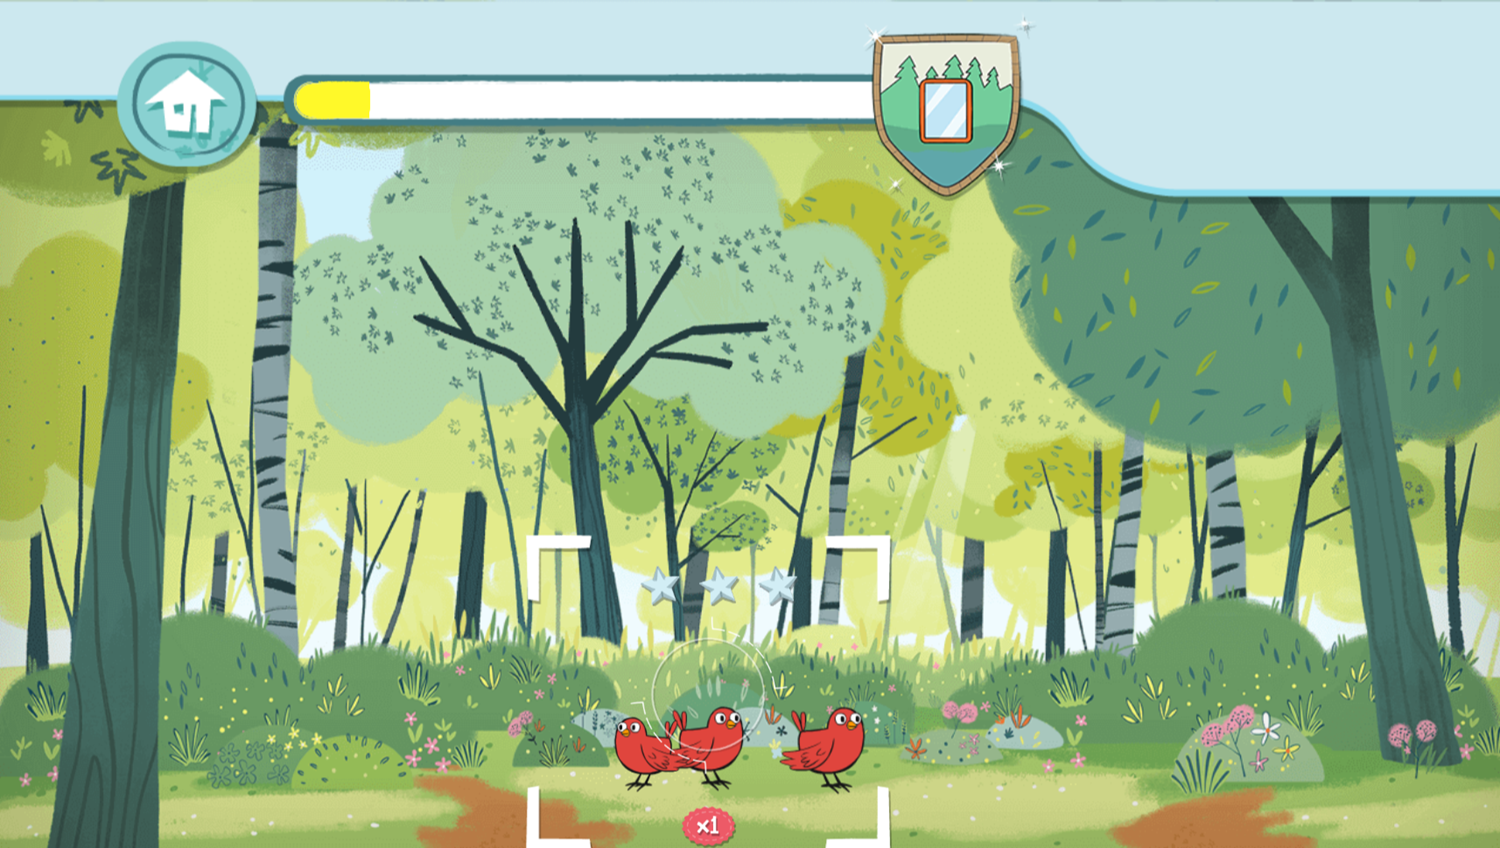 Agent Hal Pet Detective Game Picture Animal Screenshot.